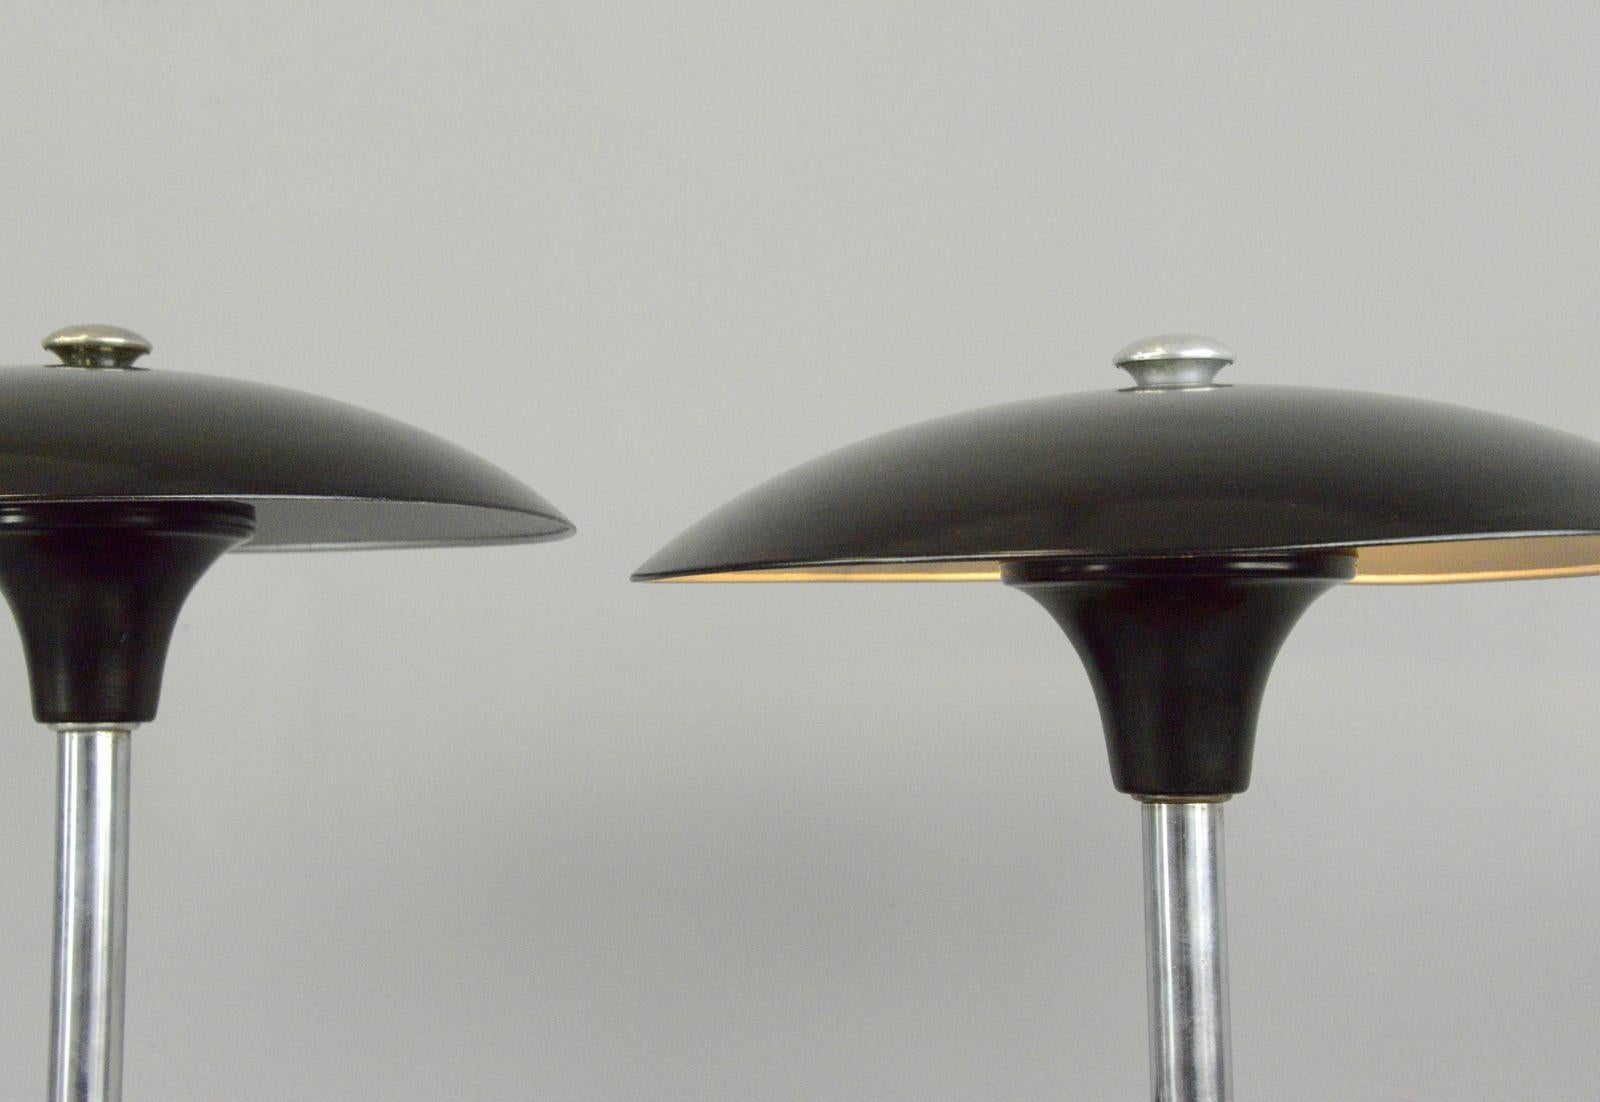 Table lamp by Max Schumacher for Werner Schröder Lobenstein.

- Price is per lamp
- Domed steel shade
- Chrome stem
- On/Off push switch on the base
- Takes E27 fitting bulbs
- Designed by Max Schumacher
- Produced by Werner Schröder,